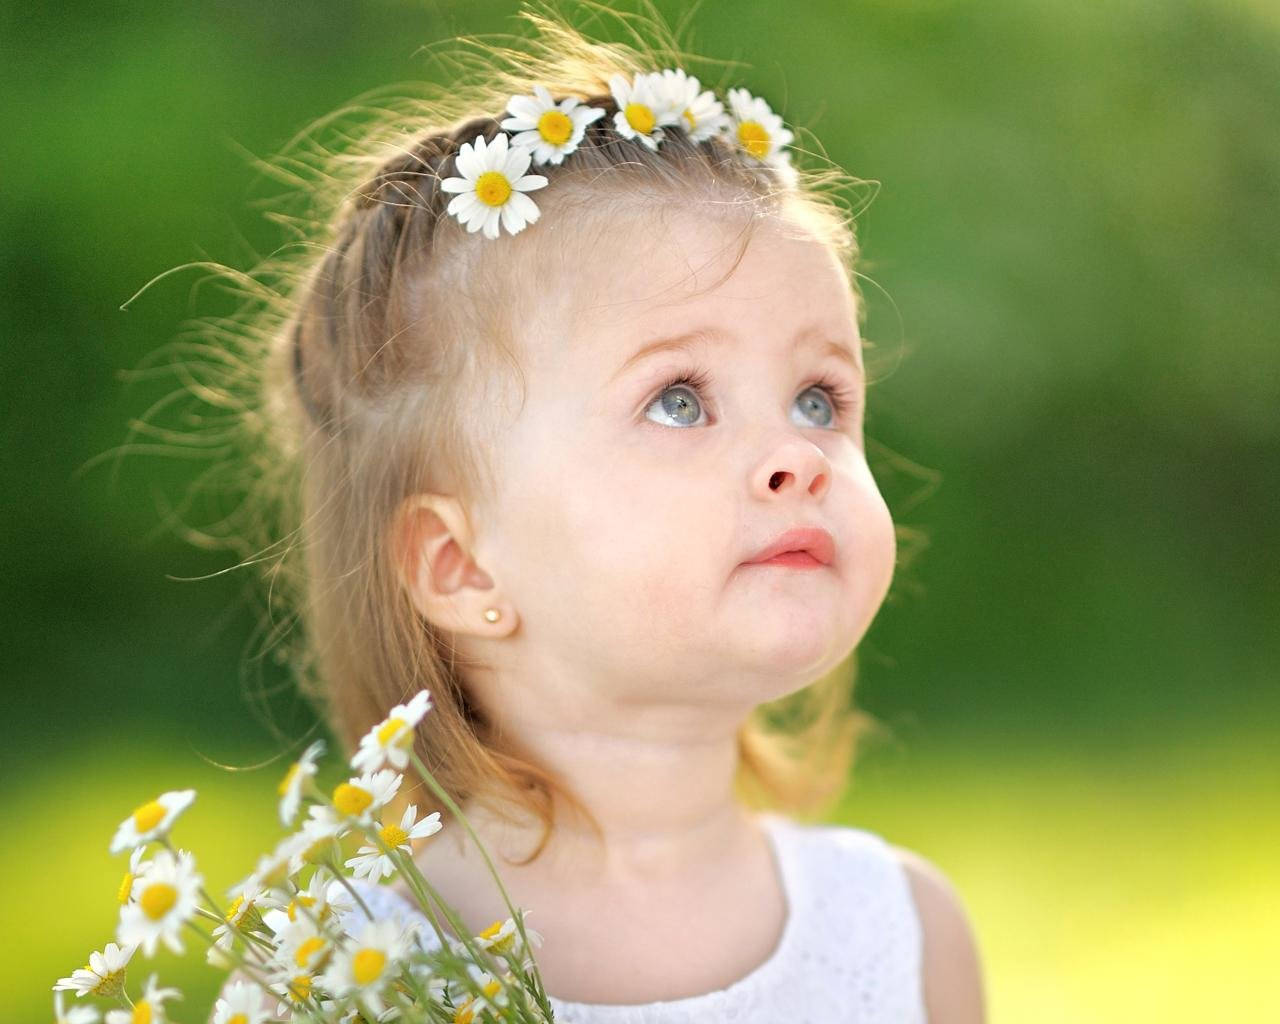 Angelic Girl Child With Floral Headdress Wallpaper